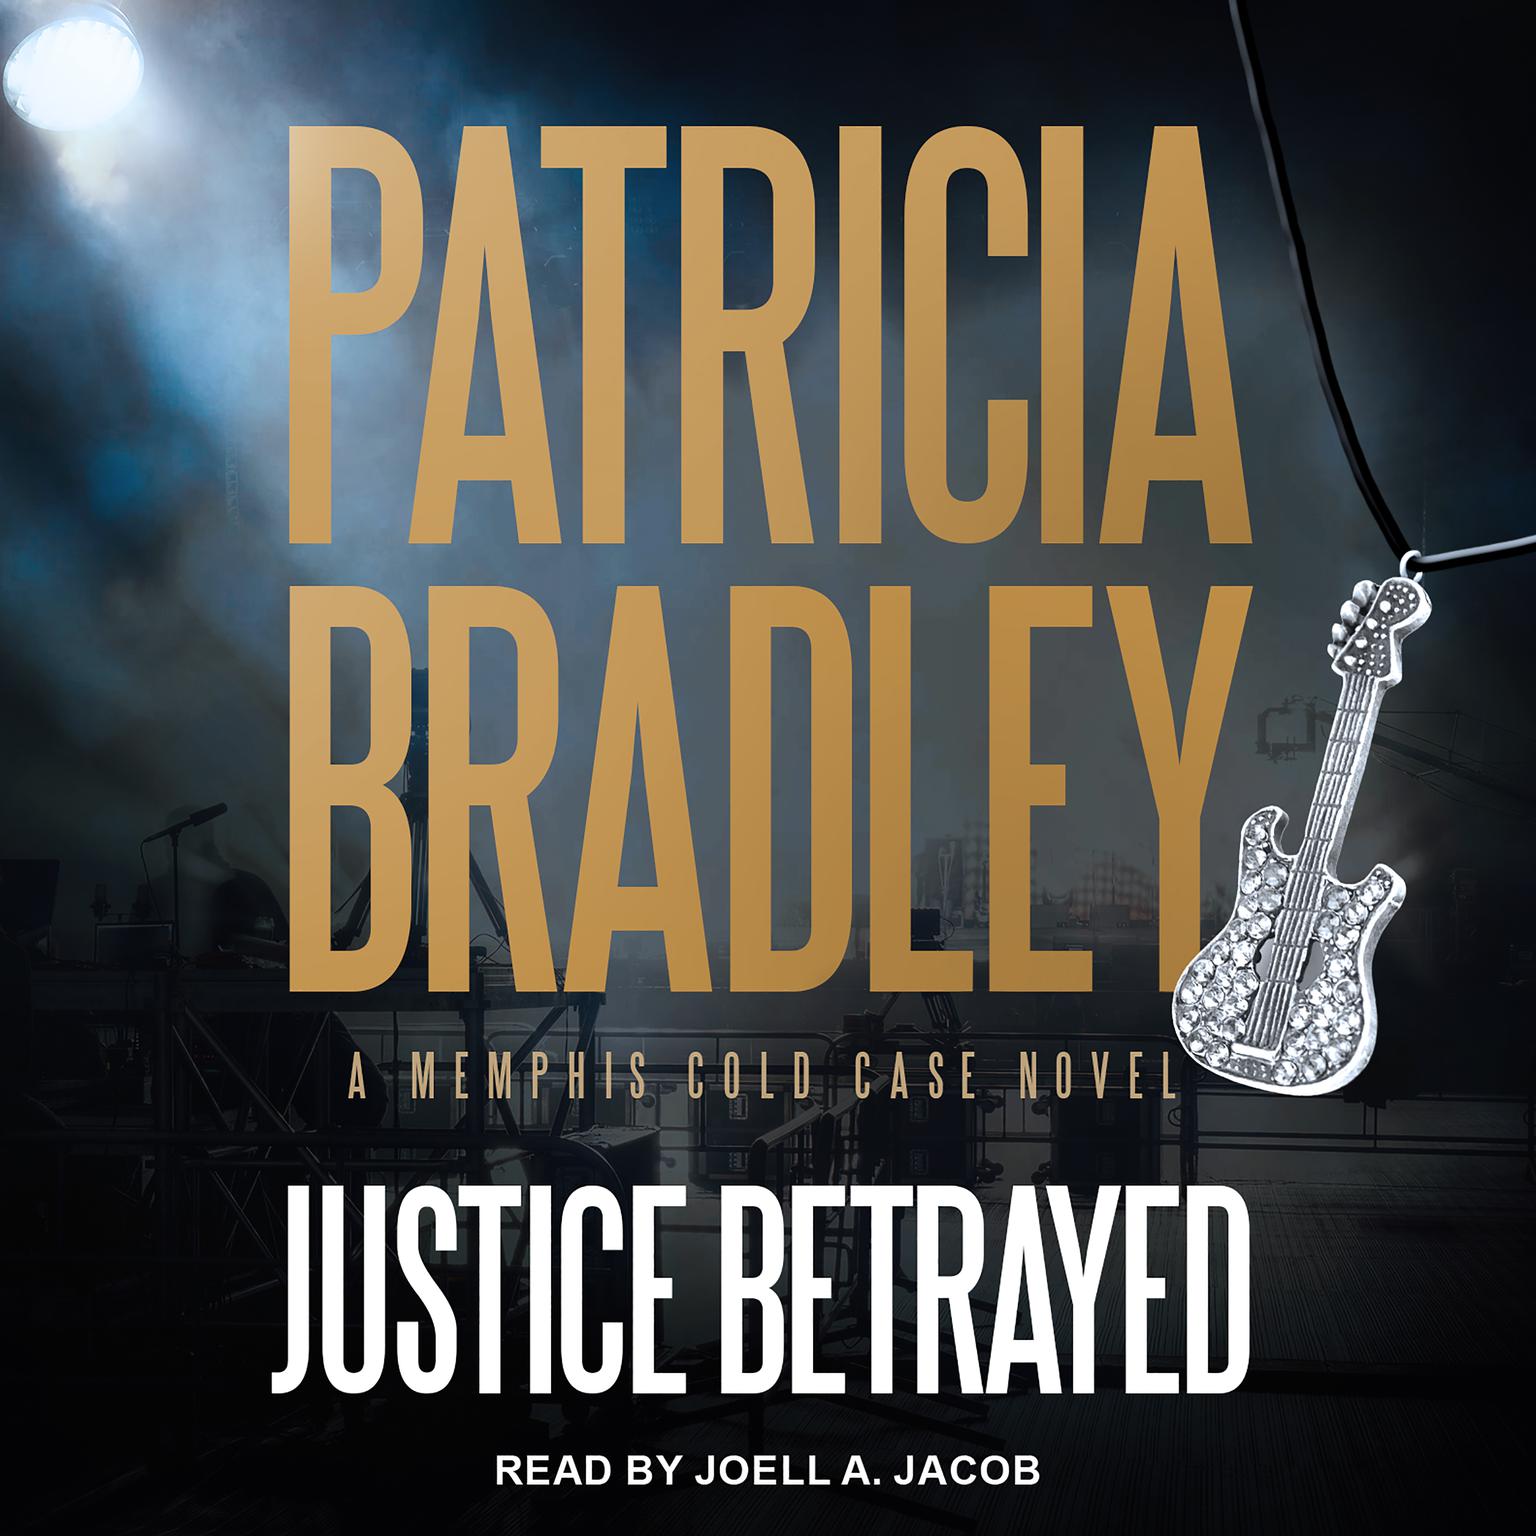 Justice Betrayed Audiobook, by Patricia Bradley